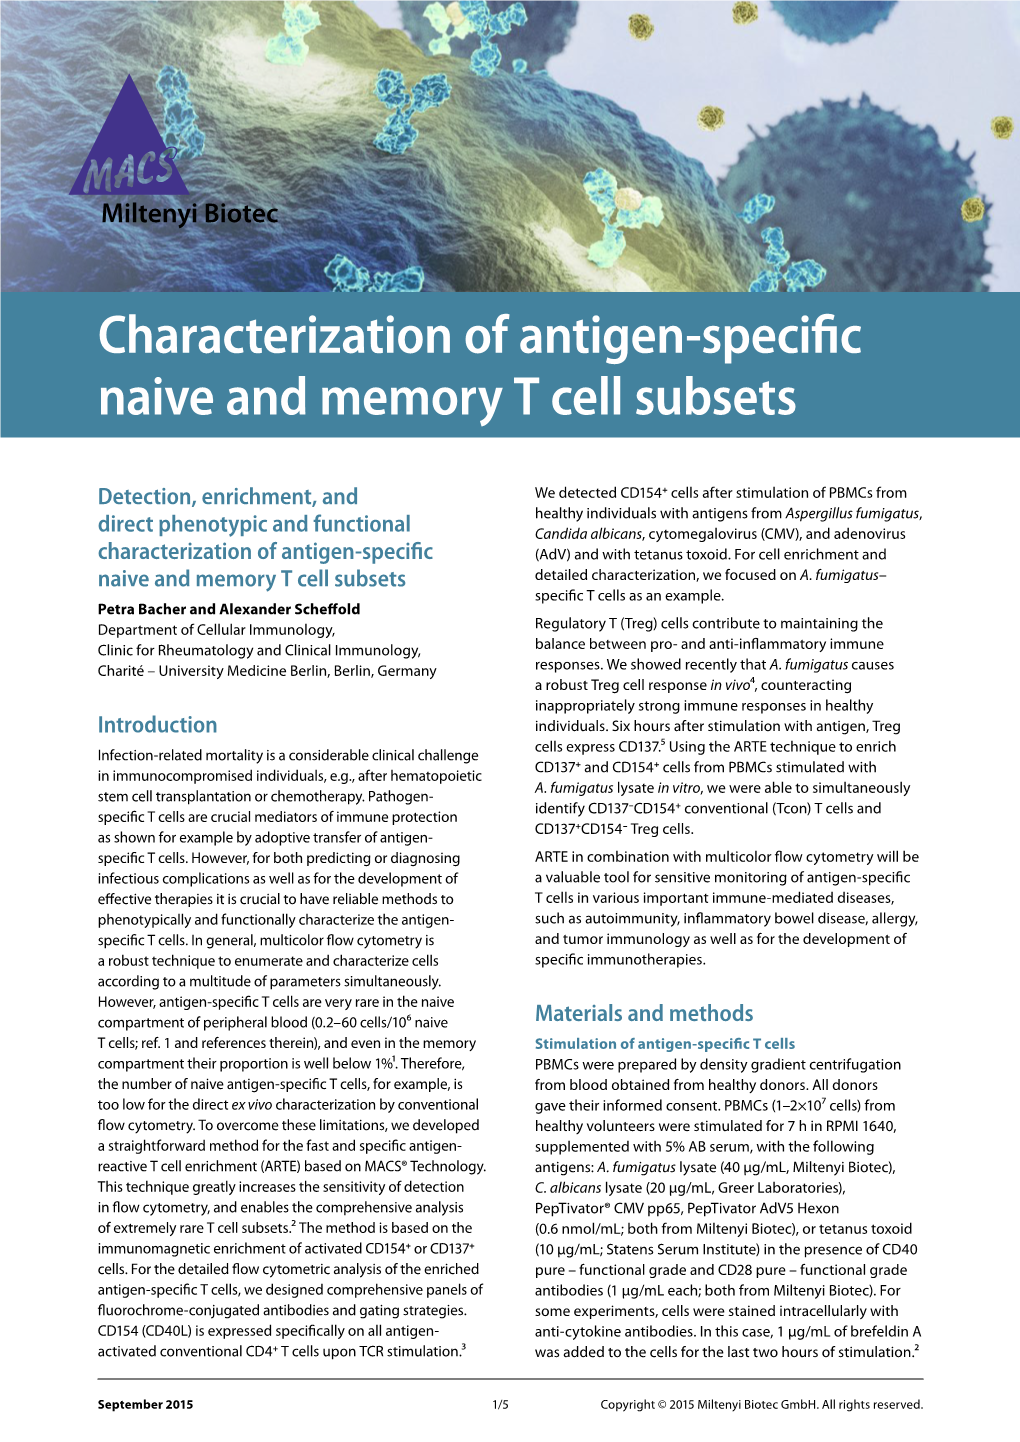 Characterization of Antigen-Specific Naive and Memory T Cell Subsets